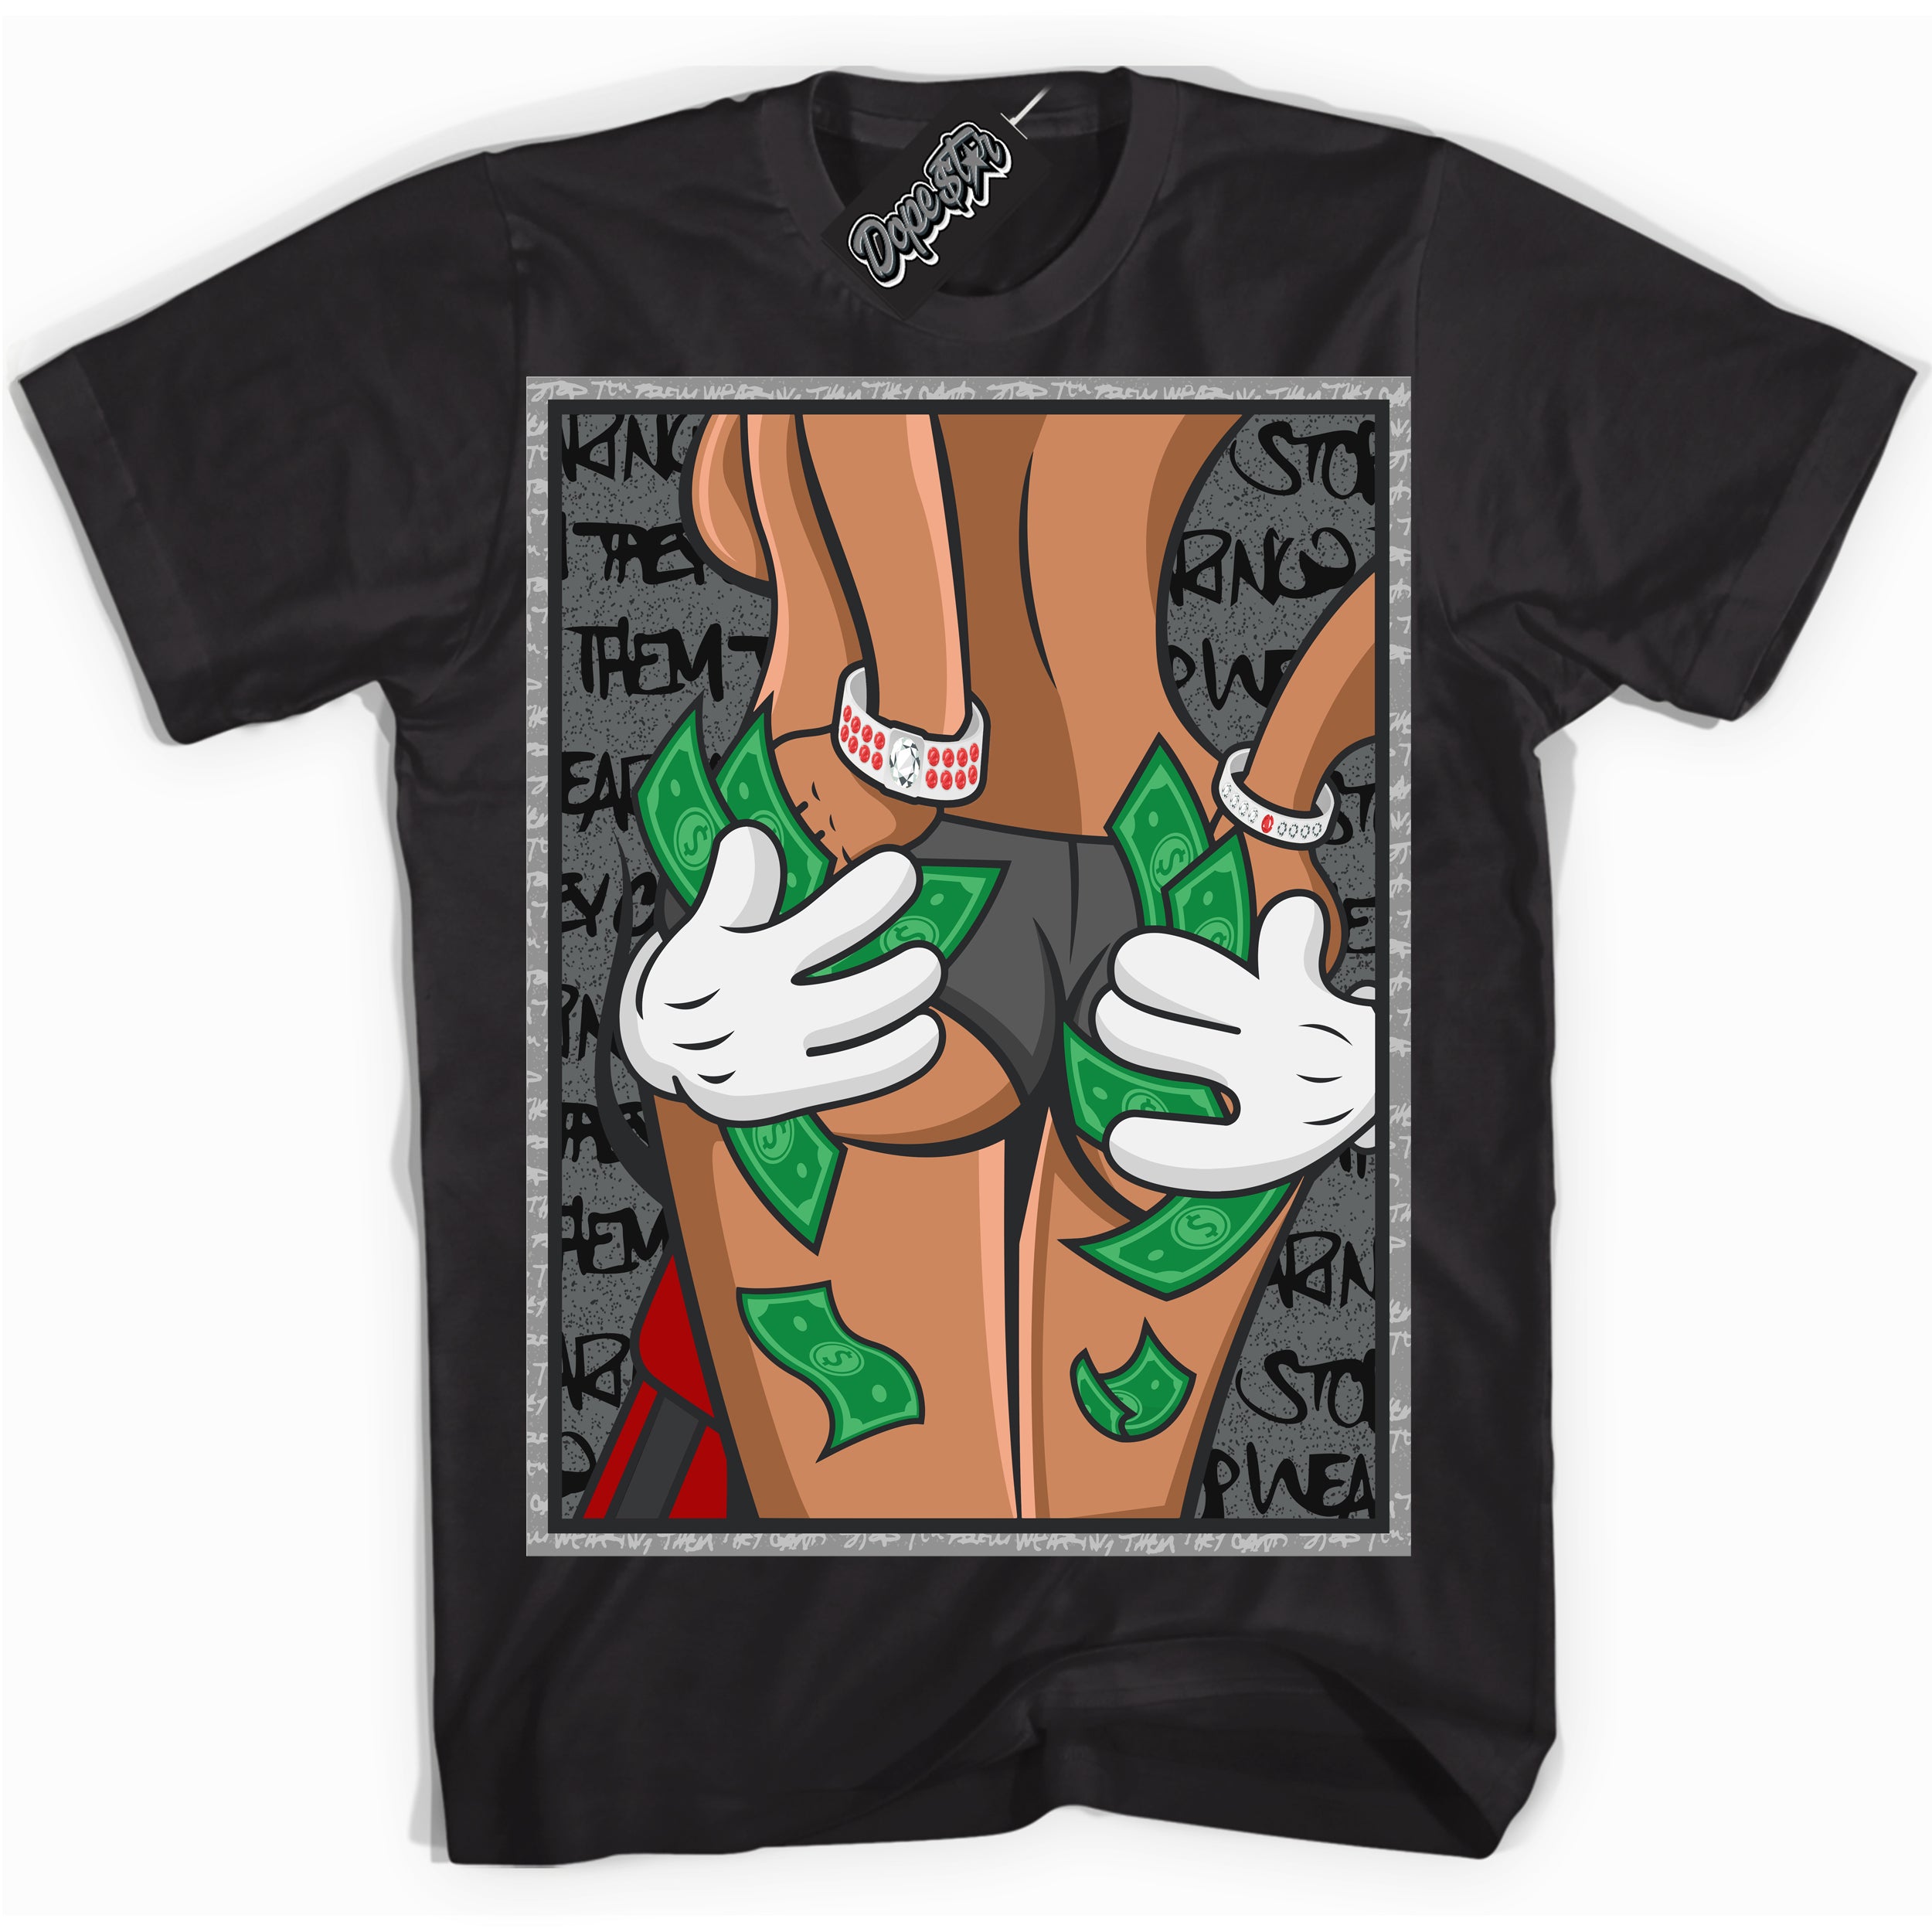 Cool Black Shirt with “ Money Hands ” design that perfectly matches Rebellionaire 1s Sneakers.